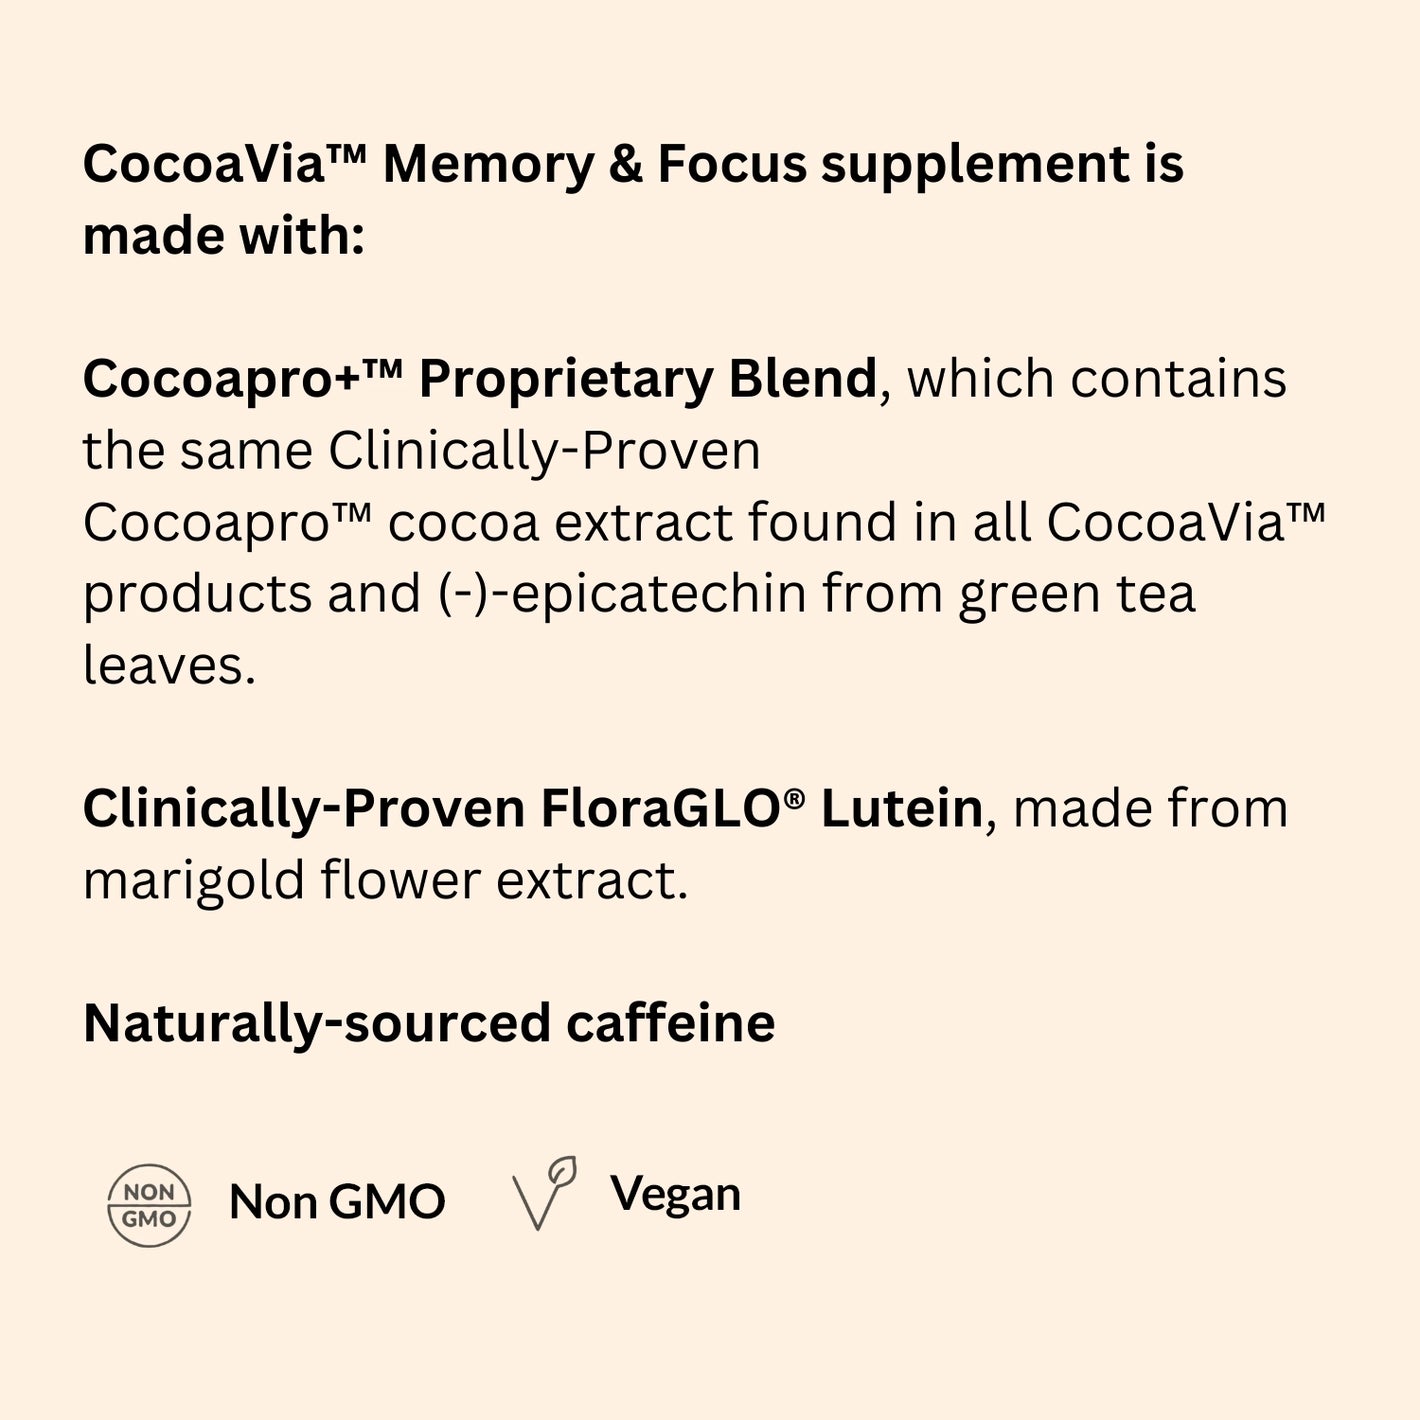 Unique plant-based blend to boost brain performance! CocoaVia™ Memory & Focus supplement is made with:   Cocoapro+™ Proprietary Blend, which contains the same Clinically-Proven Cocoapro™ cocoa extract found in all CocoaVia™ products and (-)-epicatechin from green tea leaves.   Clinically-Proven FloraGLO® Lutein, made from marigold flower extract.  Naturally-sourced caffeine.  Non-GMO, Vegan.